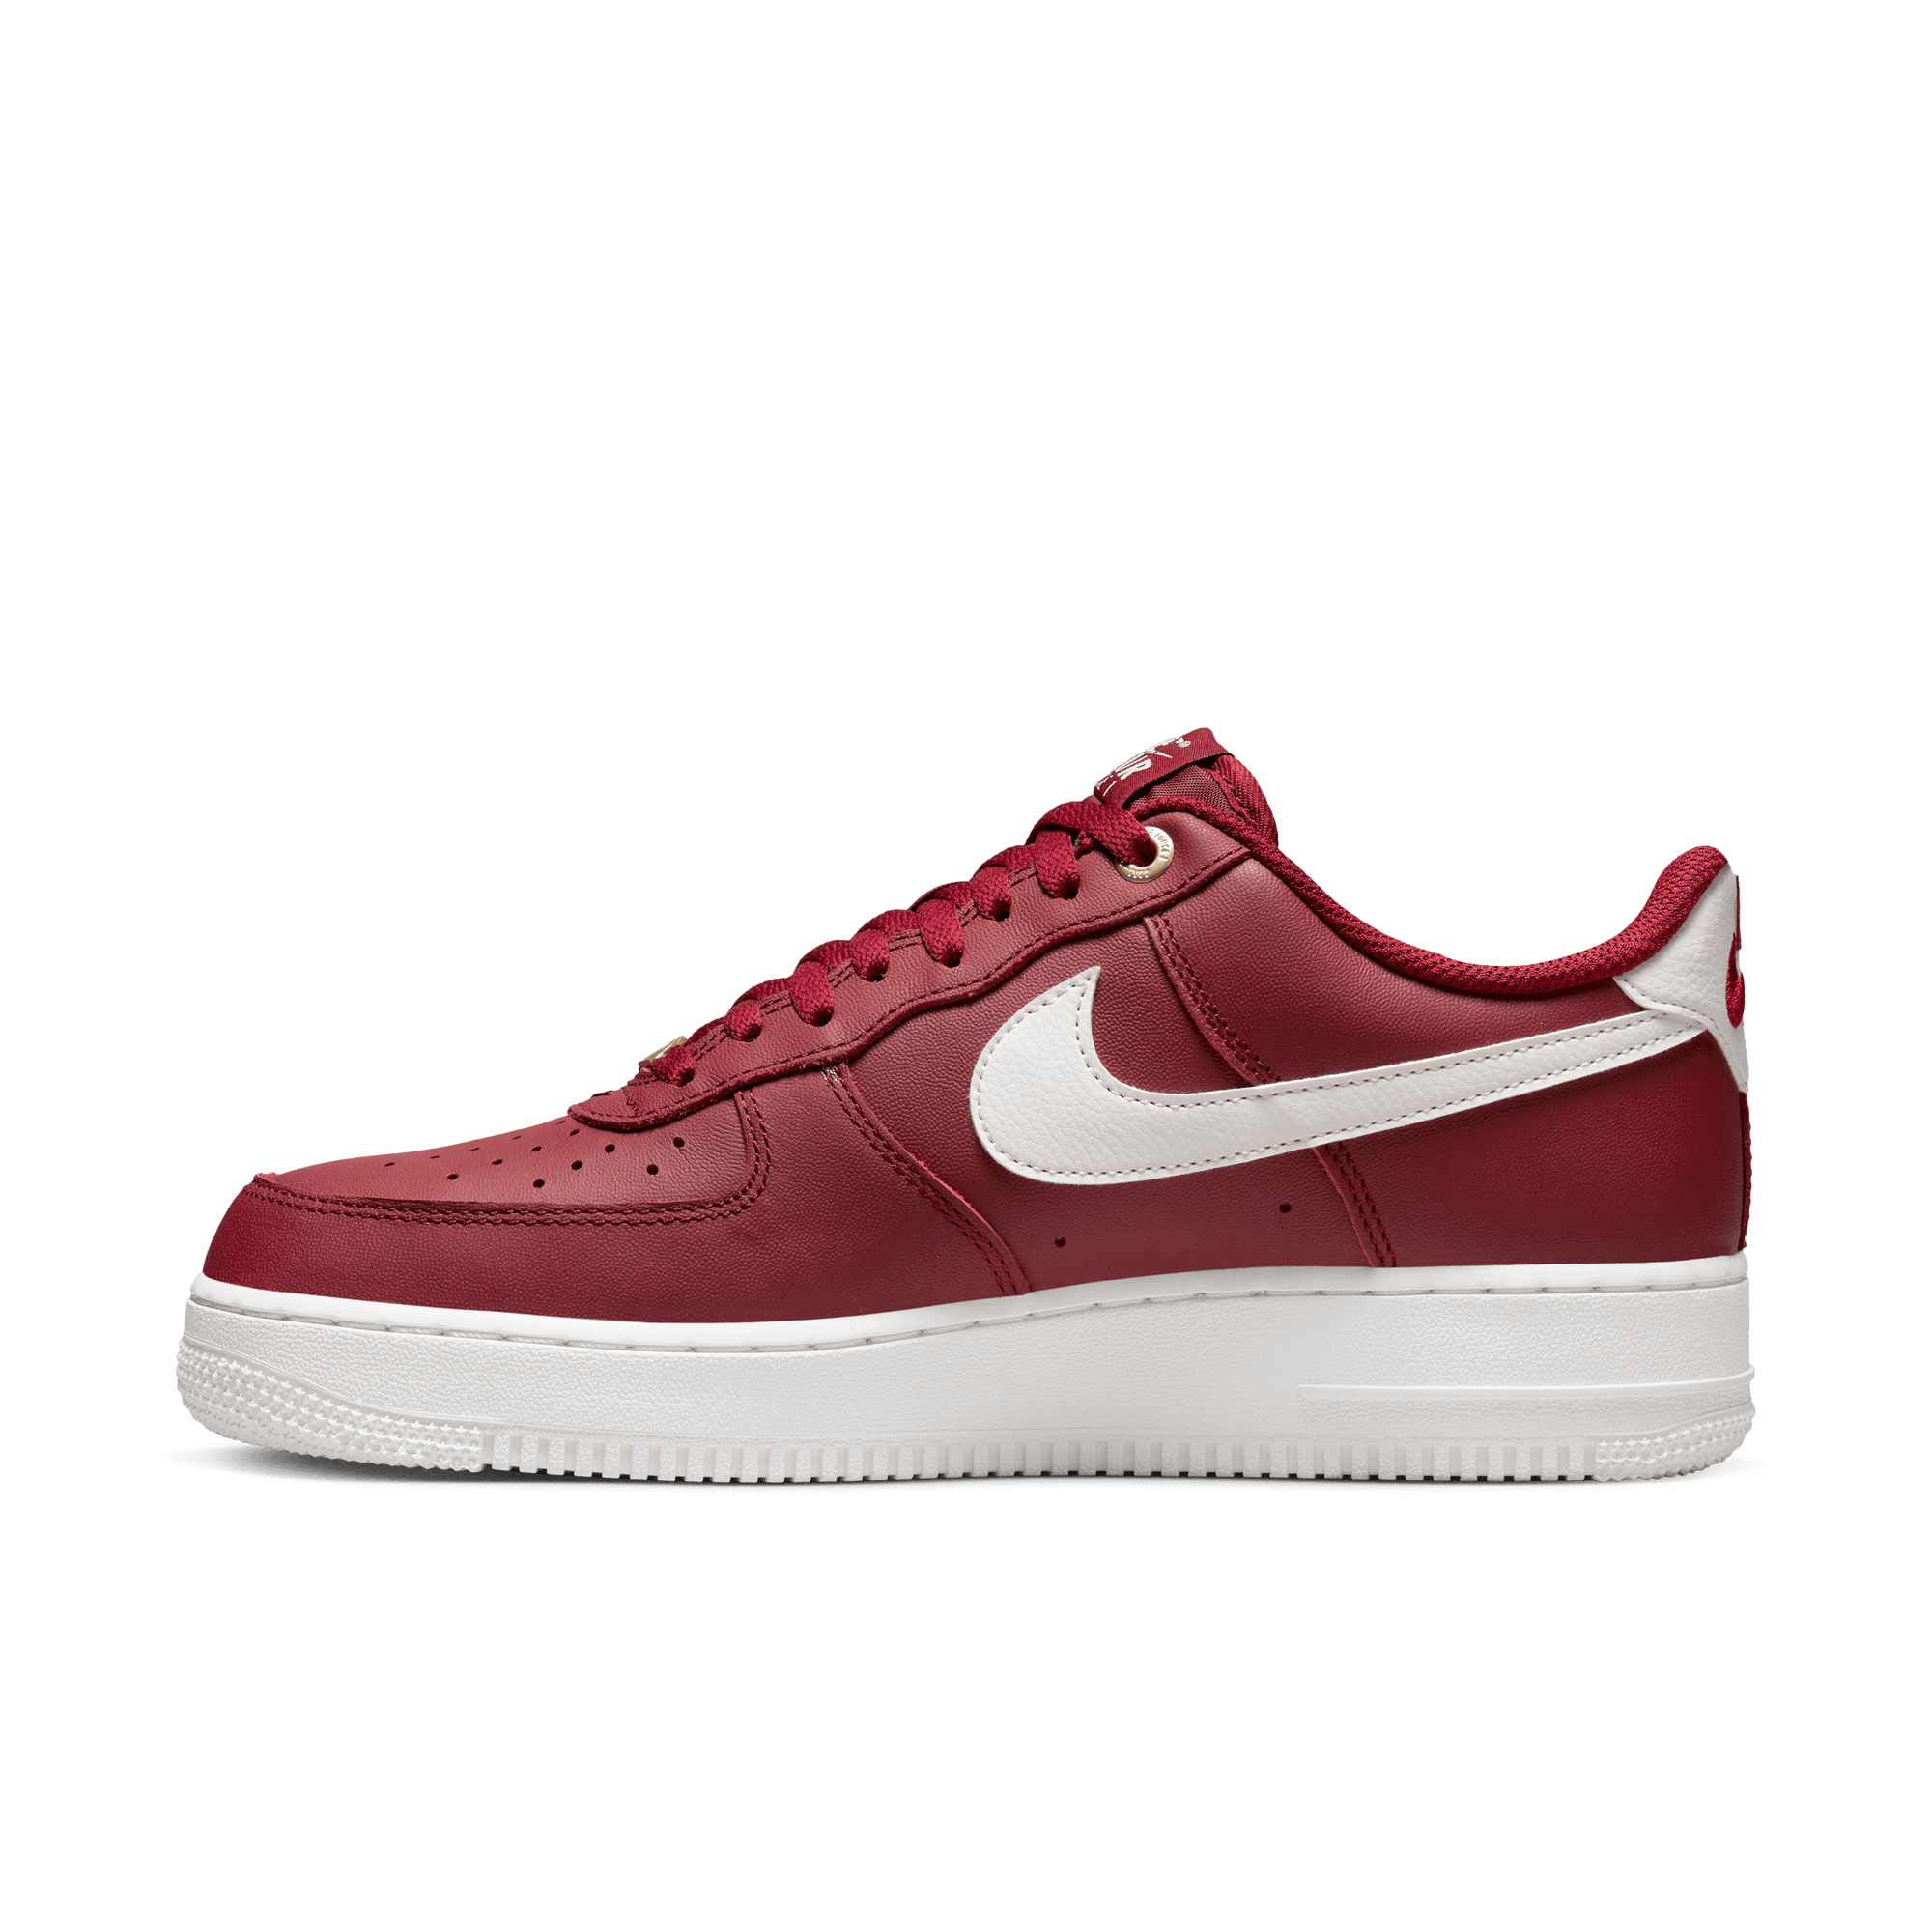 Nike Air Force 1 '07 Premium 'Join Forces Team Red'